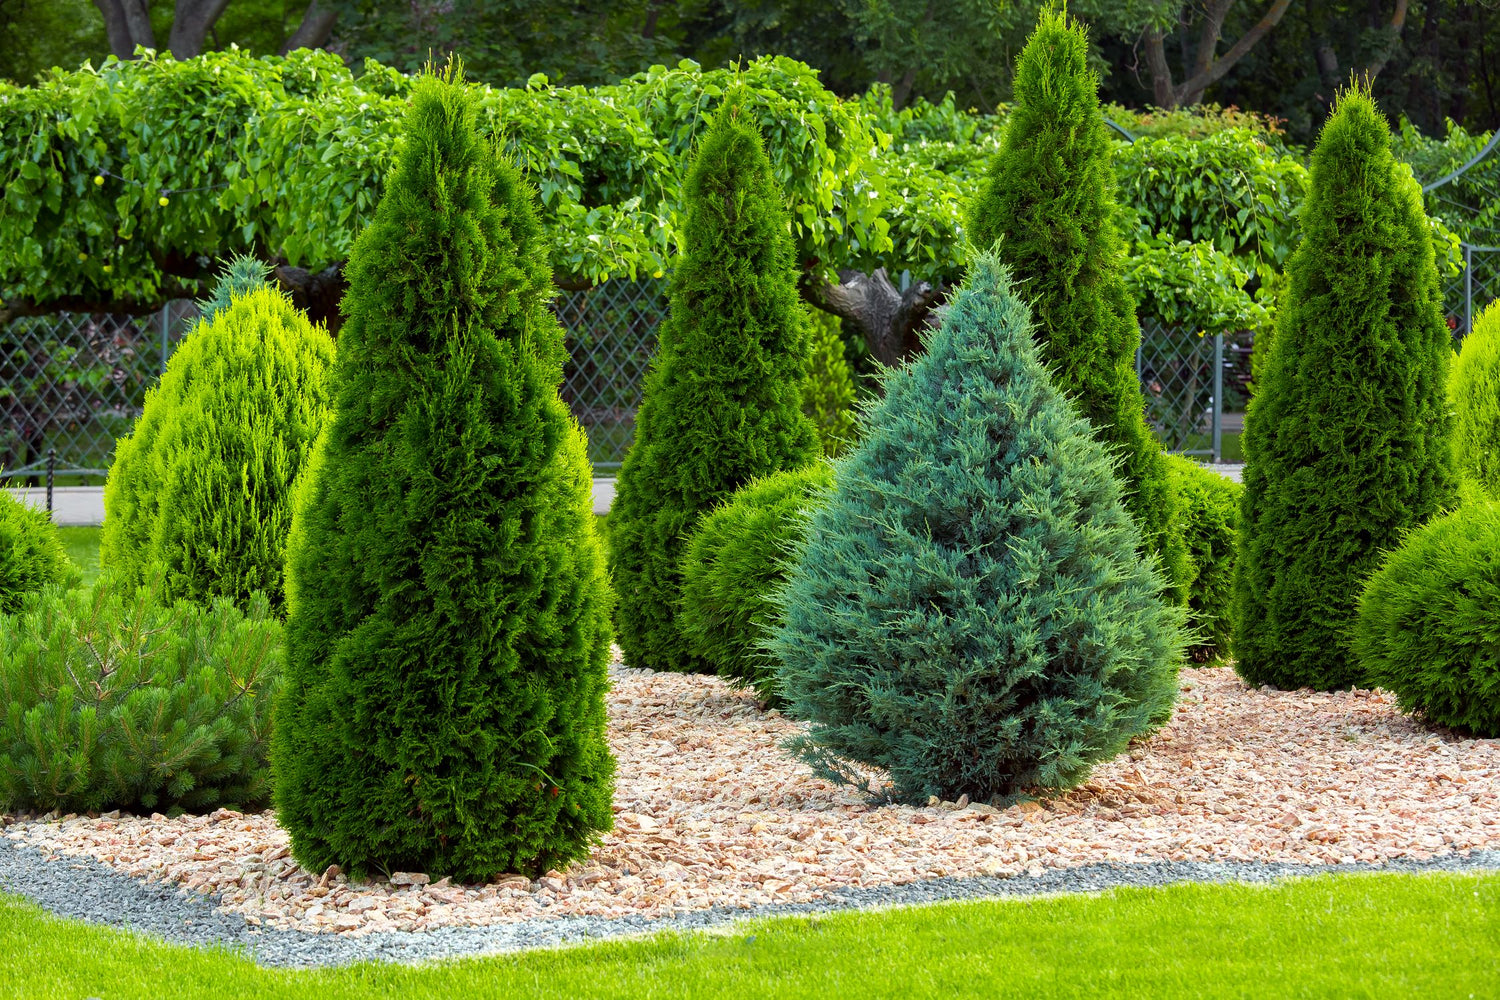 Leyland Cypress, Privacy Trees, Juniper Trees, Live Fence, Fast Growing Trees, Evergreen Trees